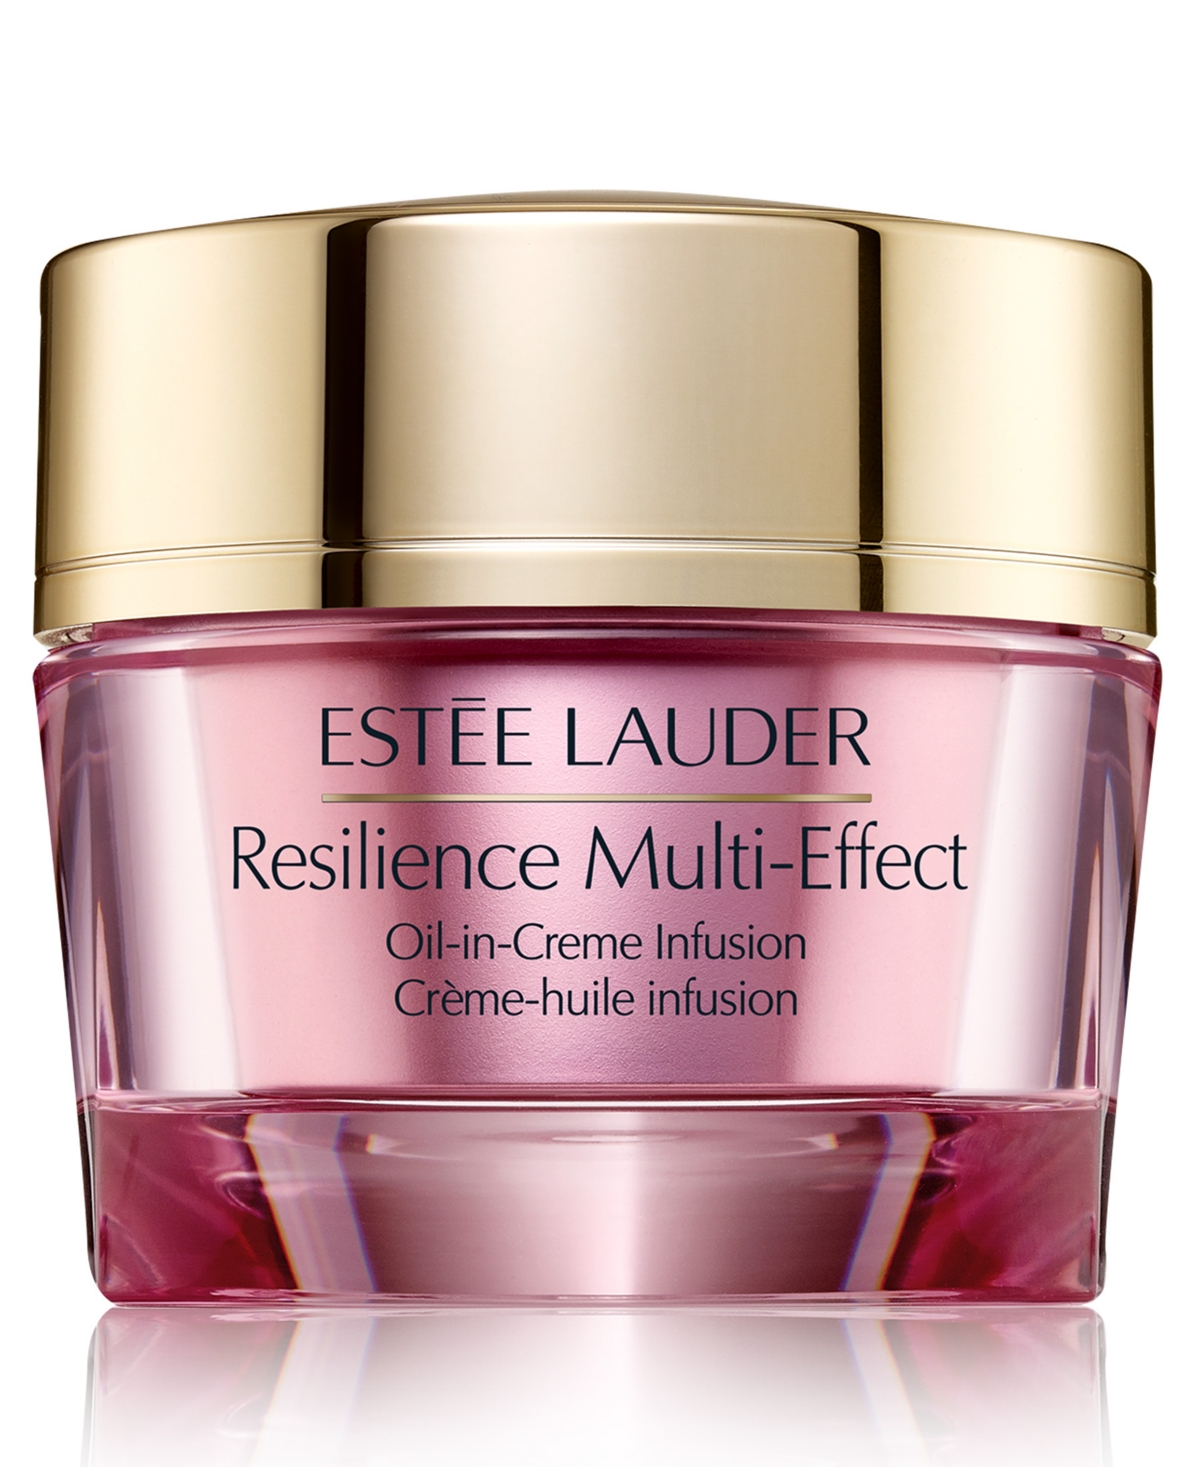 Resilience Multi-Effect Oil-in-Creme Infusion